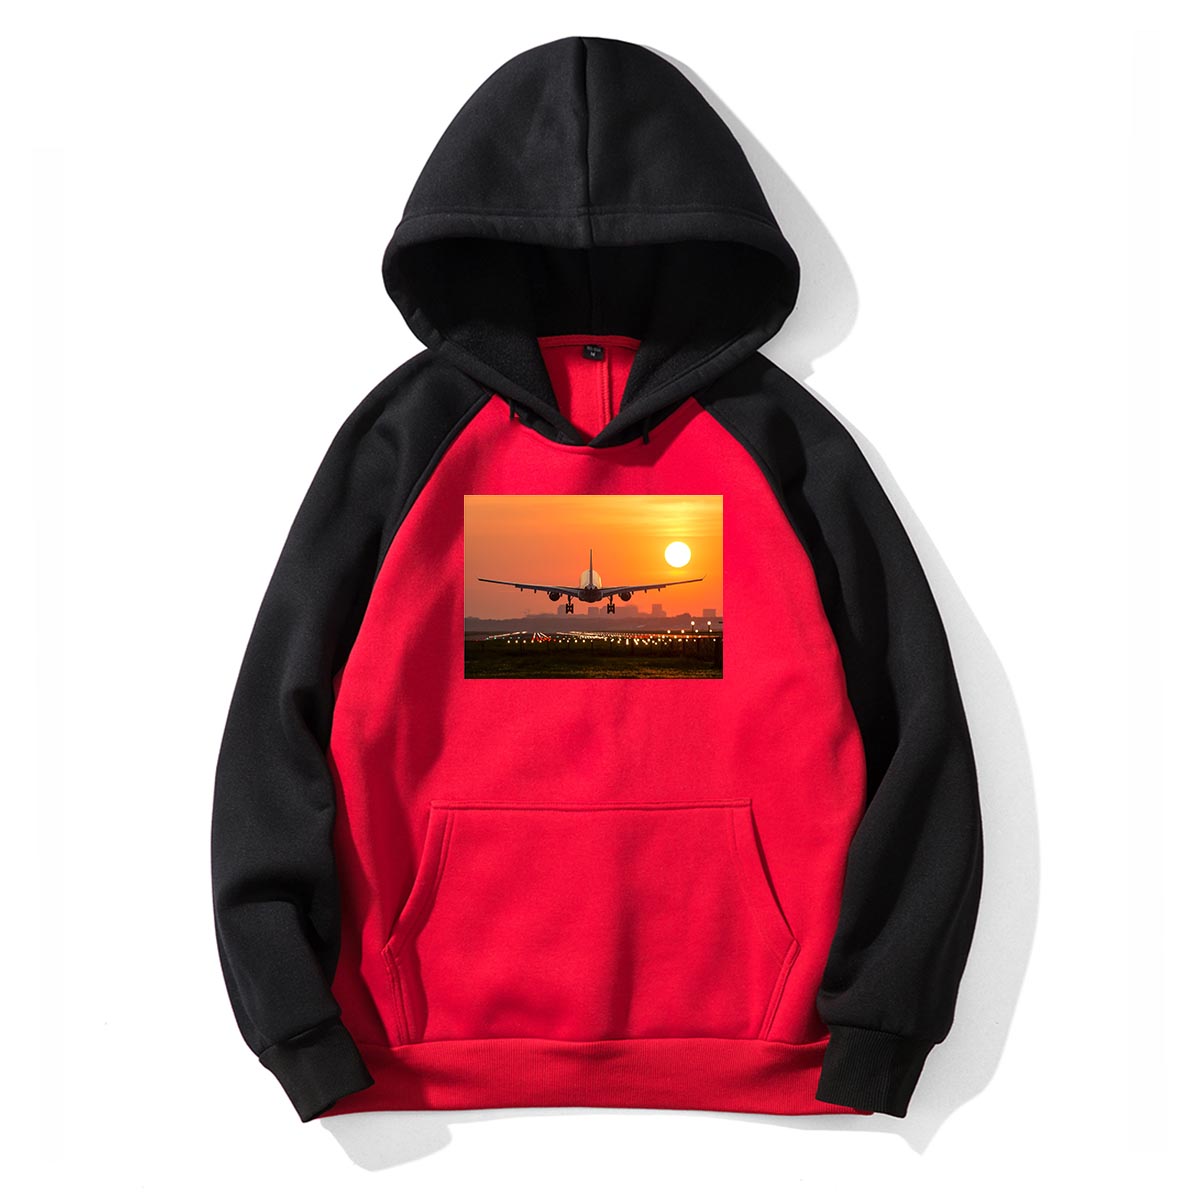 Amazing Airbus A330 Landing at Sunset Designed Colourful Hoodies